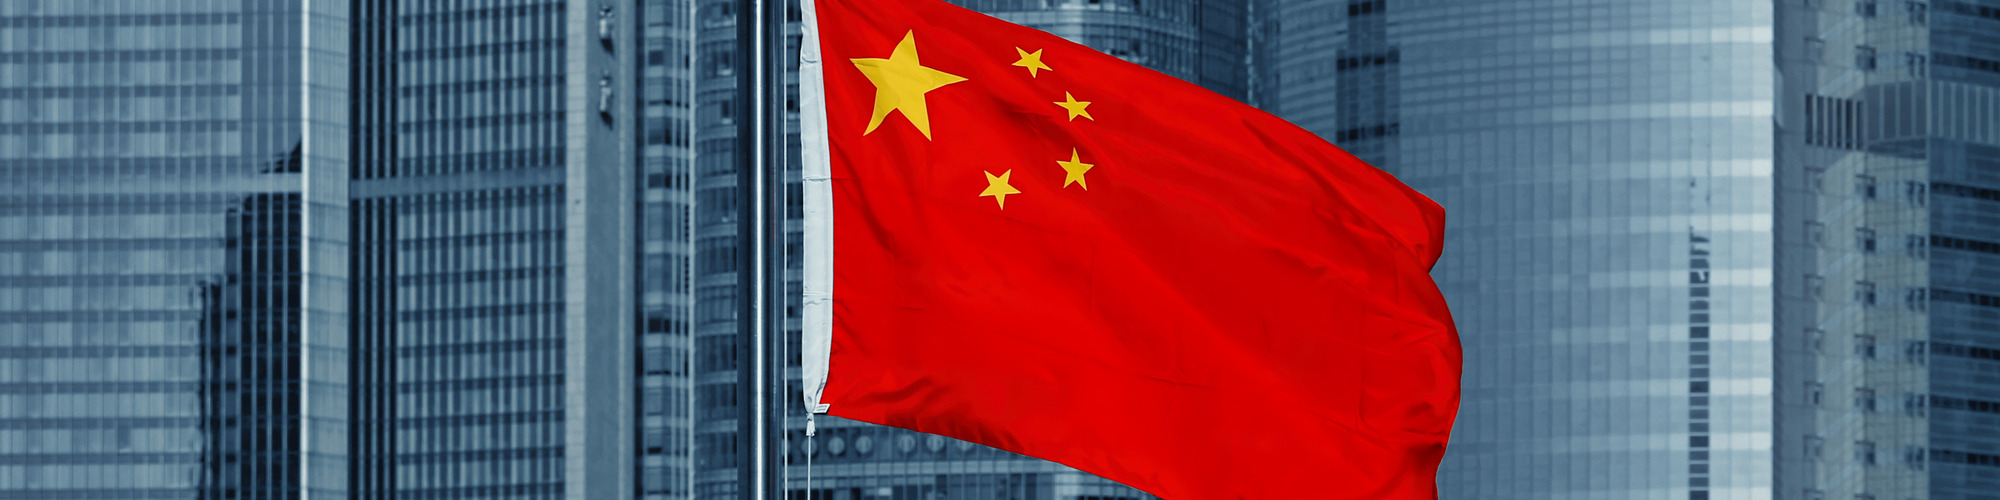 Funds from China - Minimising Risk When Discharging Your AML Reporting Obligations 